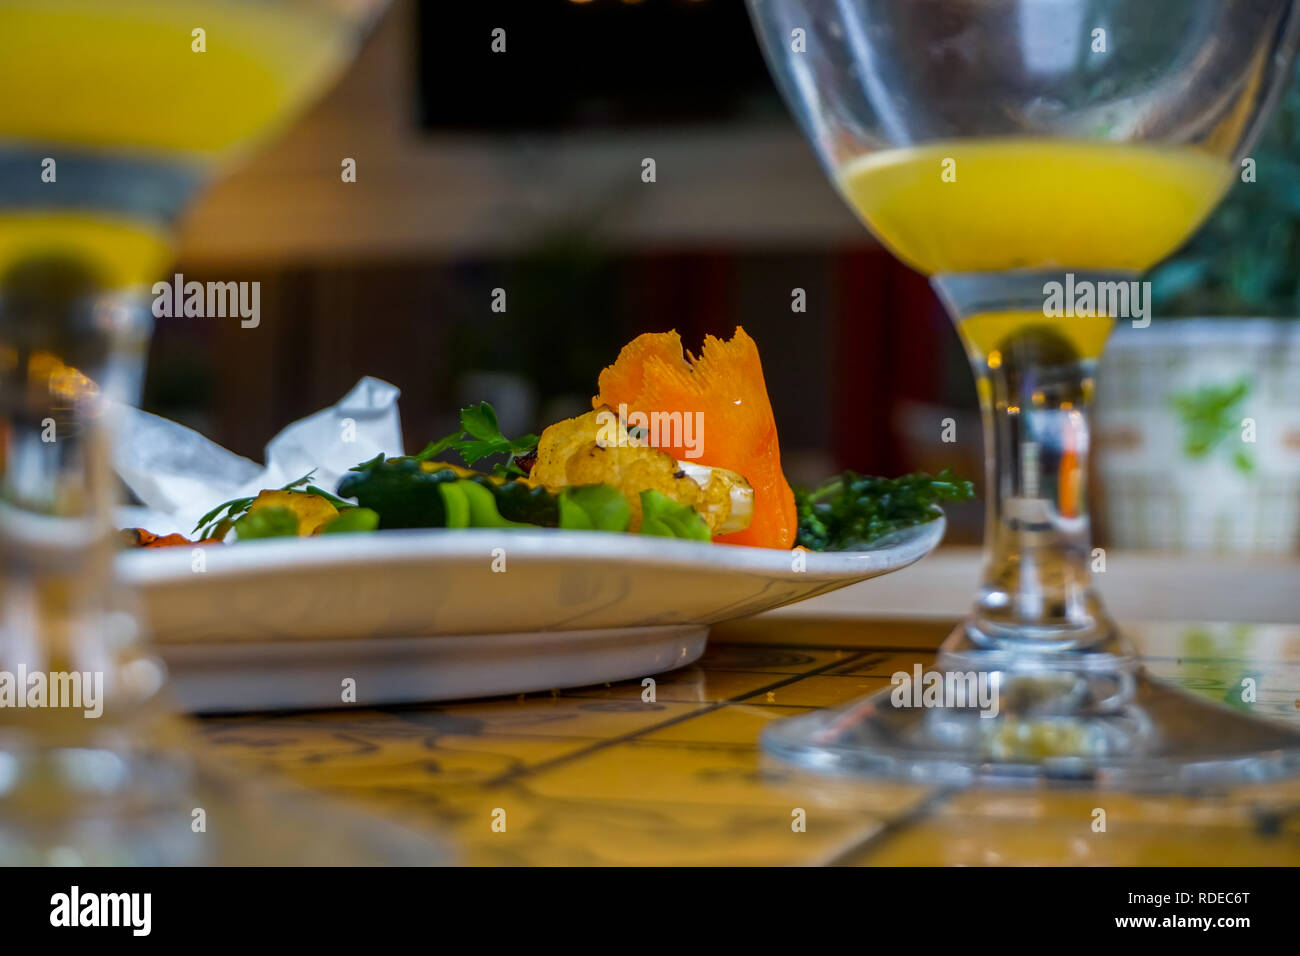 Plate with salmon salad and orange juice. Lunch in cafe Liepkalni, Latvia. Dinner in cafe. Stock Photo